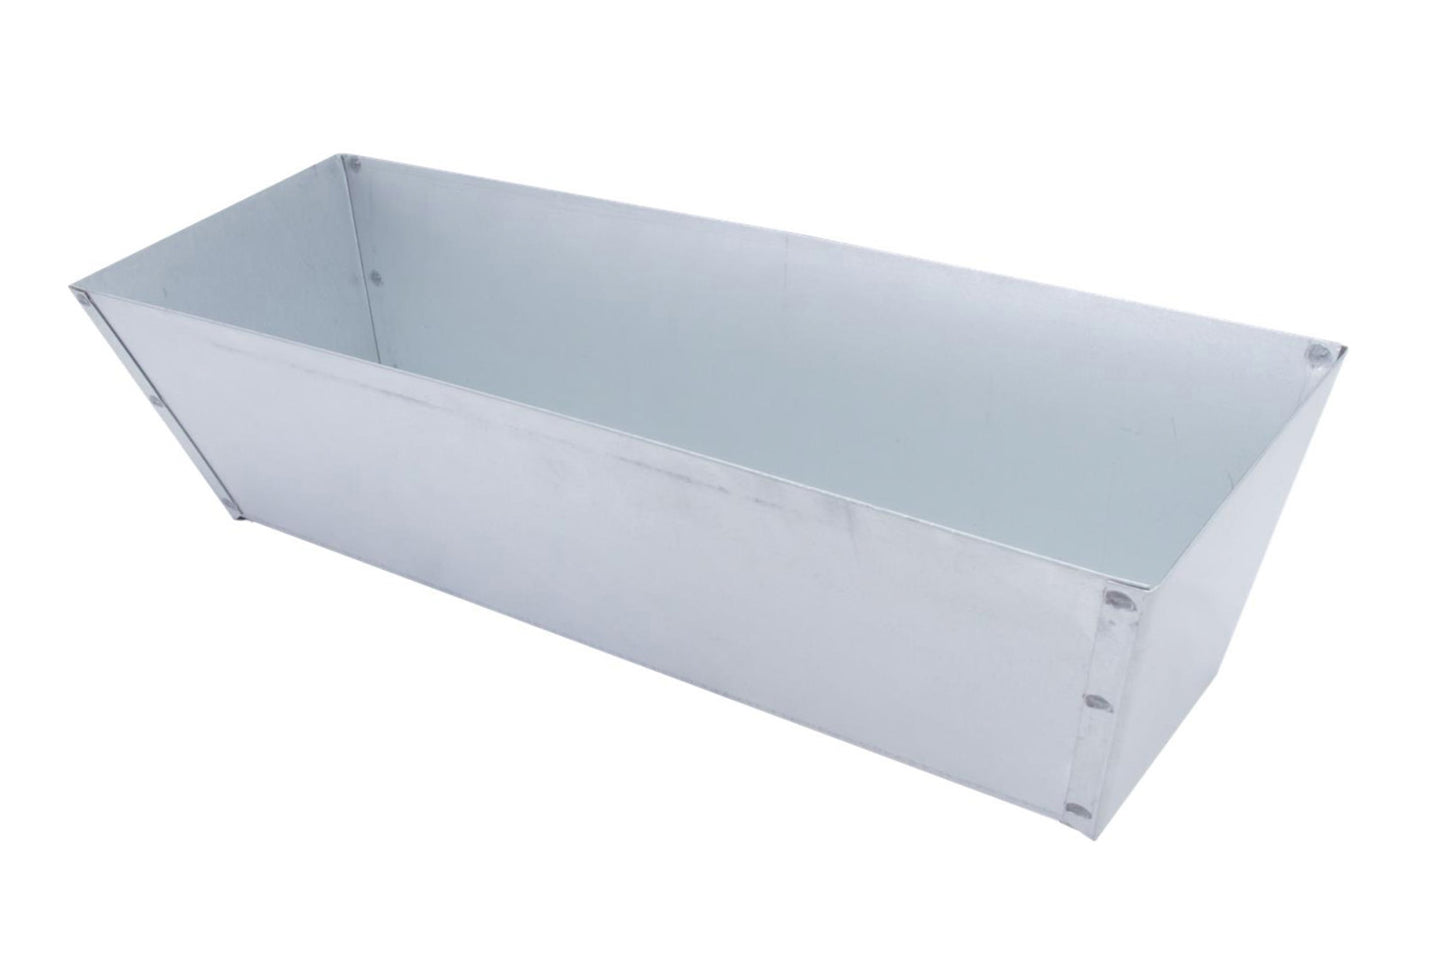 Marshalltown Galvanized Steel Mud Pan. These mud pans hold material while you work and are designed to make it easy to clean knives while not letting material get stuck in the corners. 12" length. Marshalltown Model Model 813 ~ 035965063937